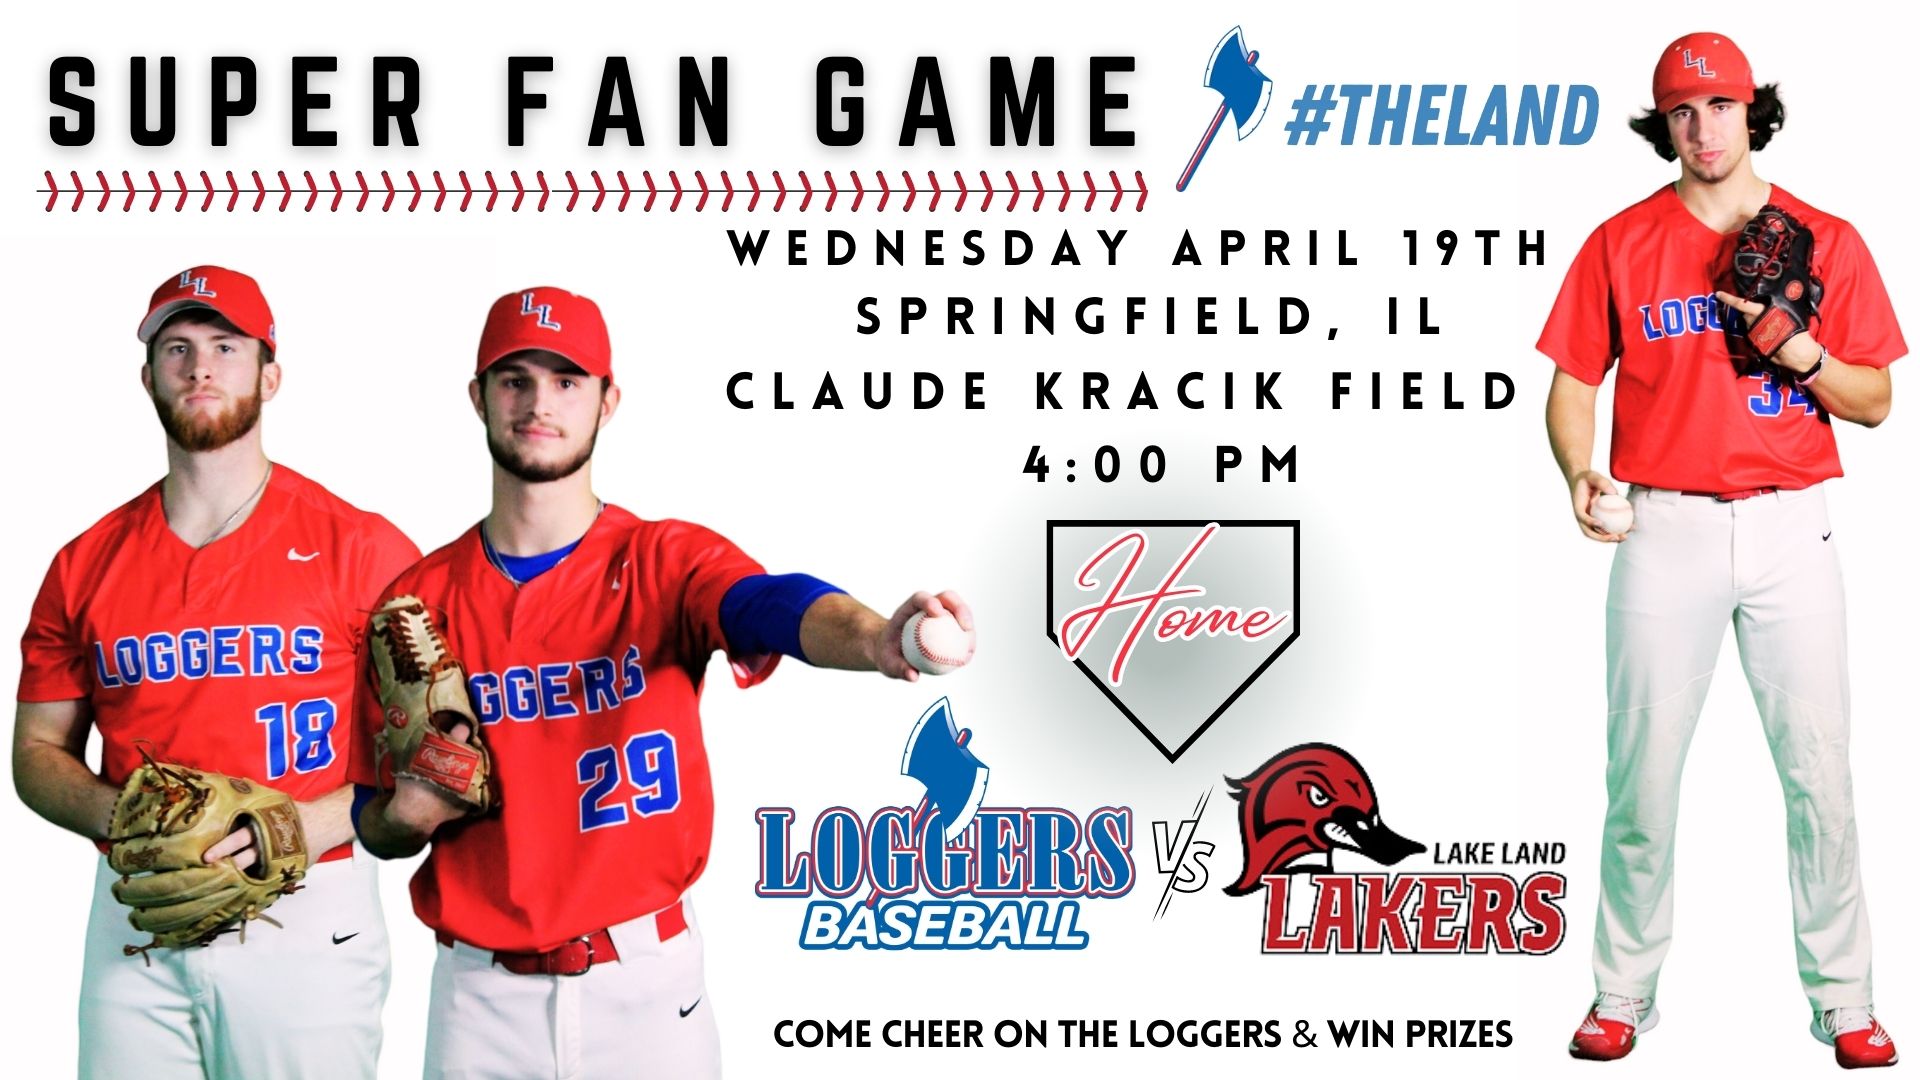 Super Fan Game. #Theland. Wednesday, April 19th, Springfield, IL. Claude Kracik Field. 4:00 pm. Home. Loggers Baseball vs. Lake Land Lakers. Come cheer on the Loggers & win prizes.